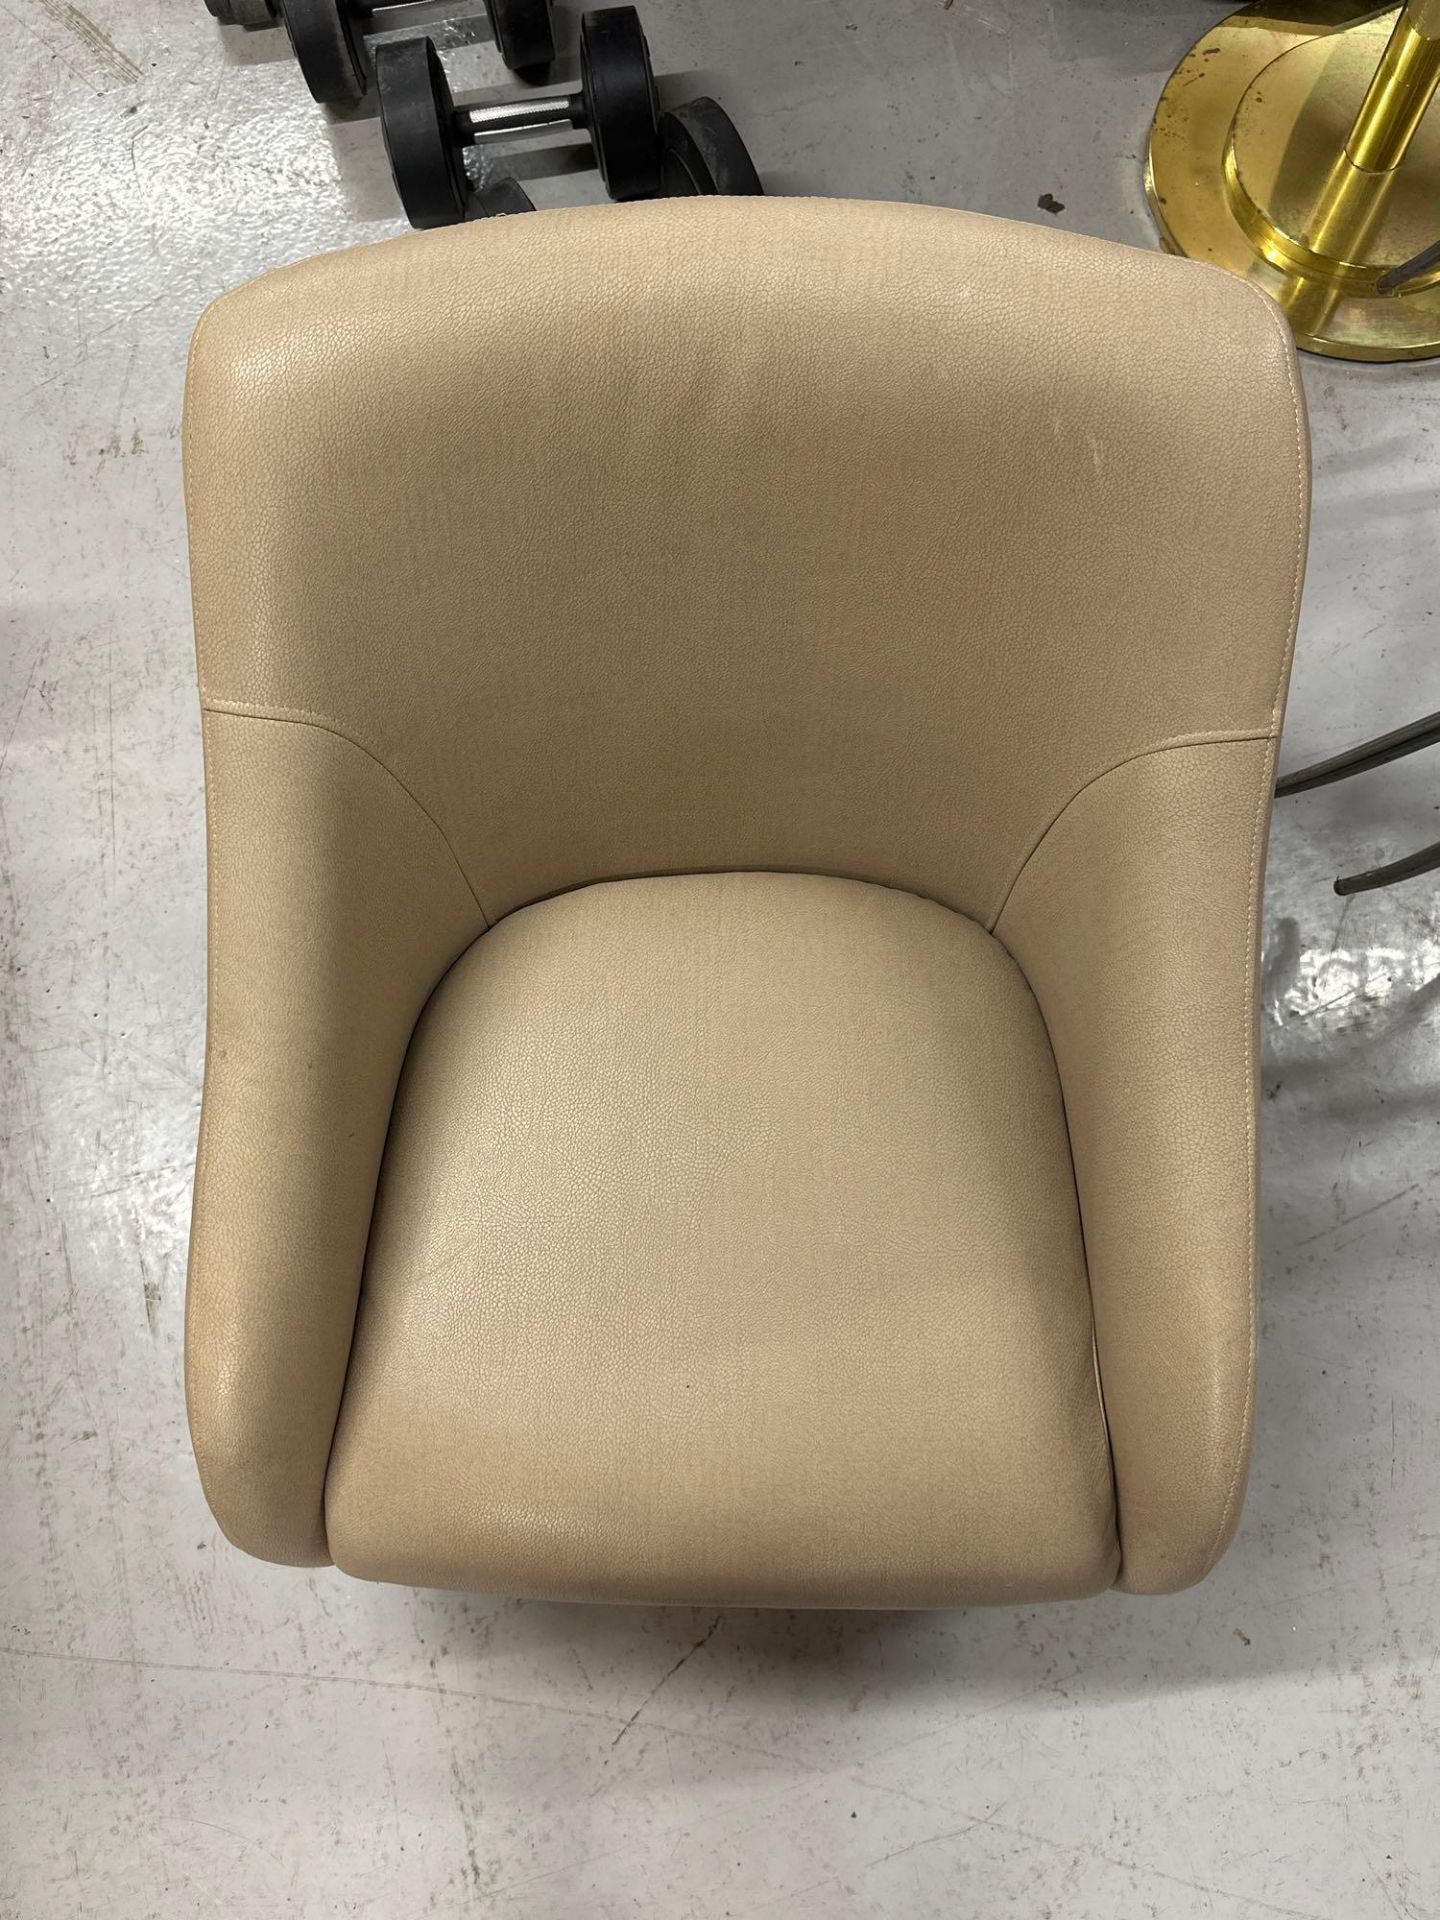 A Pair Of Upholstered Beige Dining Chairs With Dark Wooden Legs 78 x 63 x 72cm Seat Pitch 49cm - Bild 2 aus 3